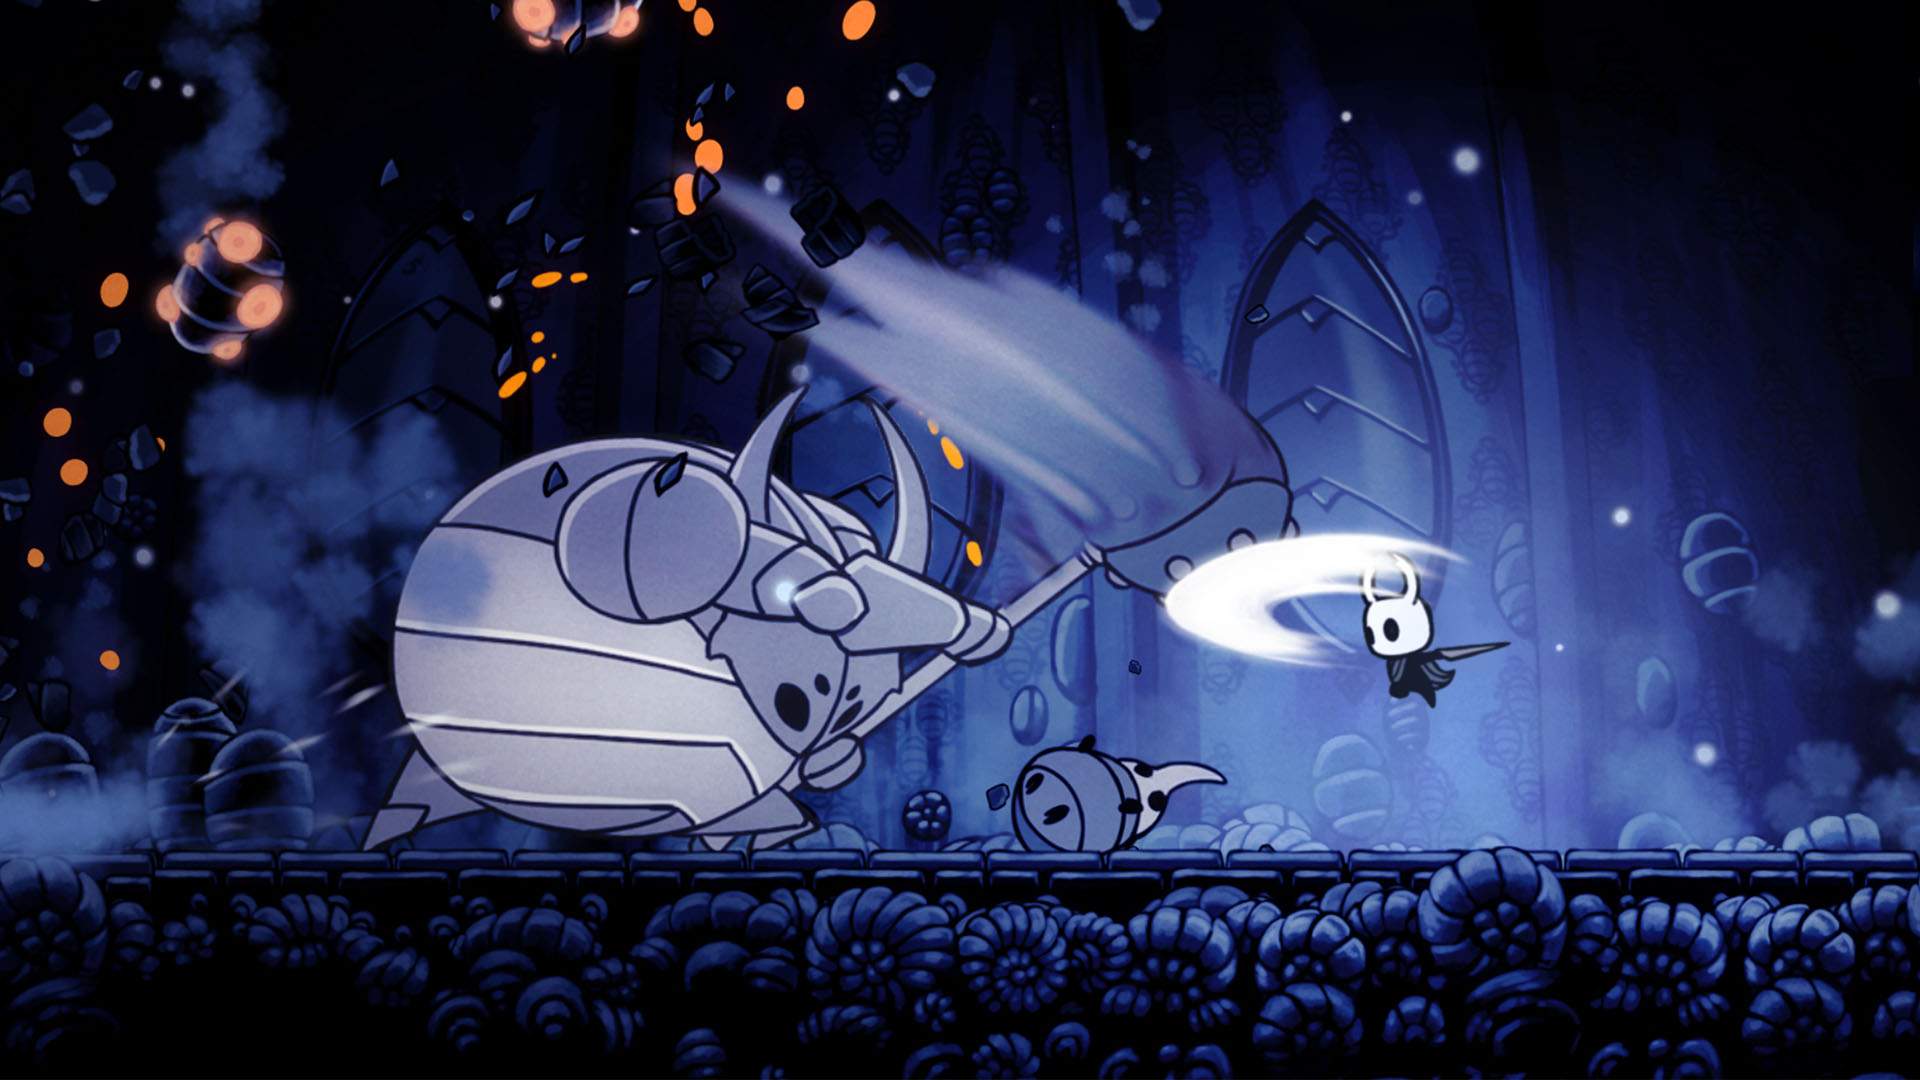 A screenshot from Hollow Knight, one of the best Australian games, showing a fight between the Hollow Knight and the False Knight